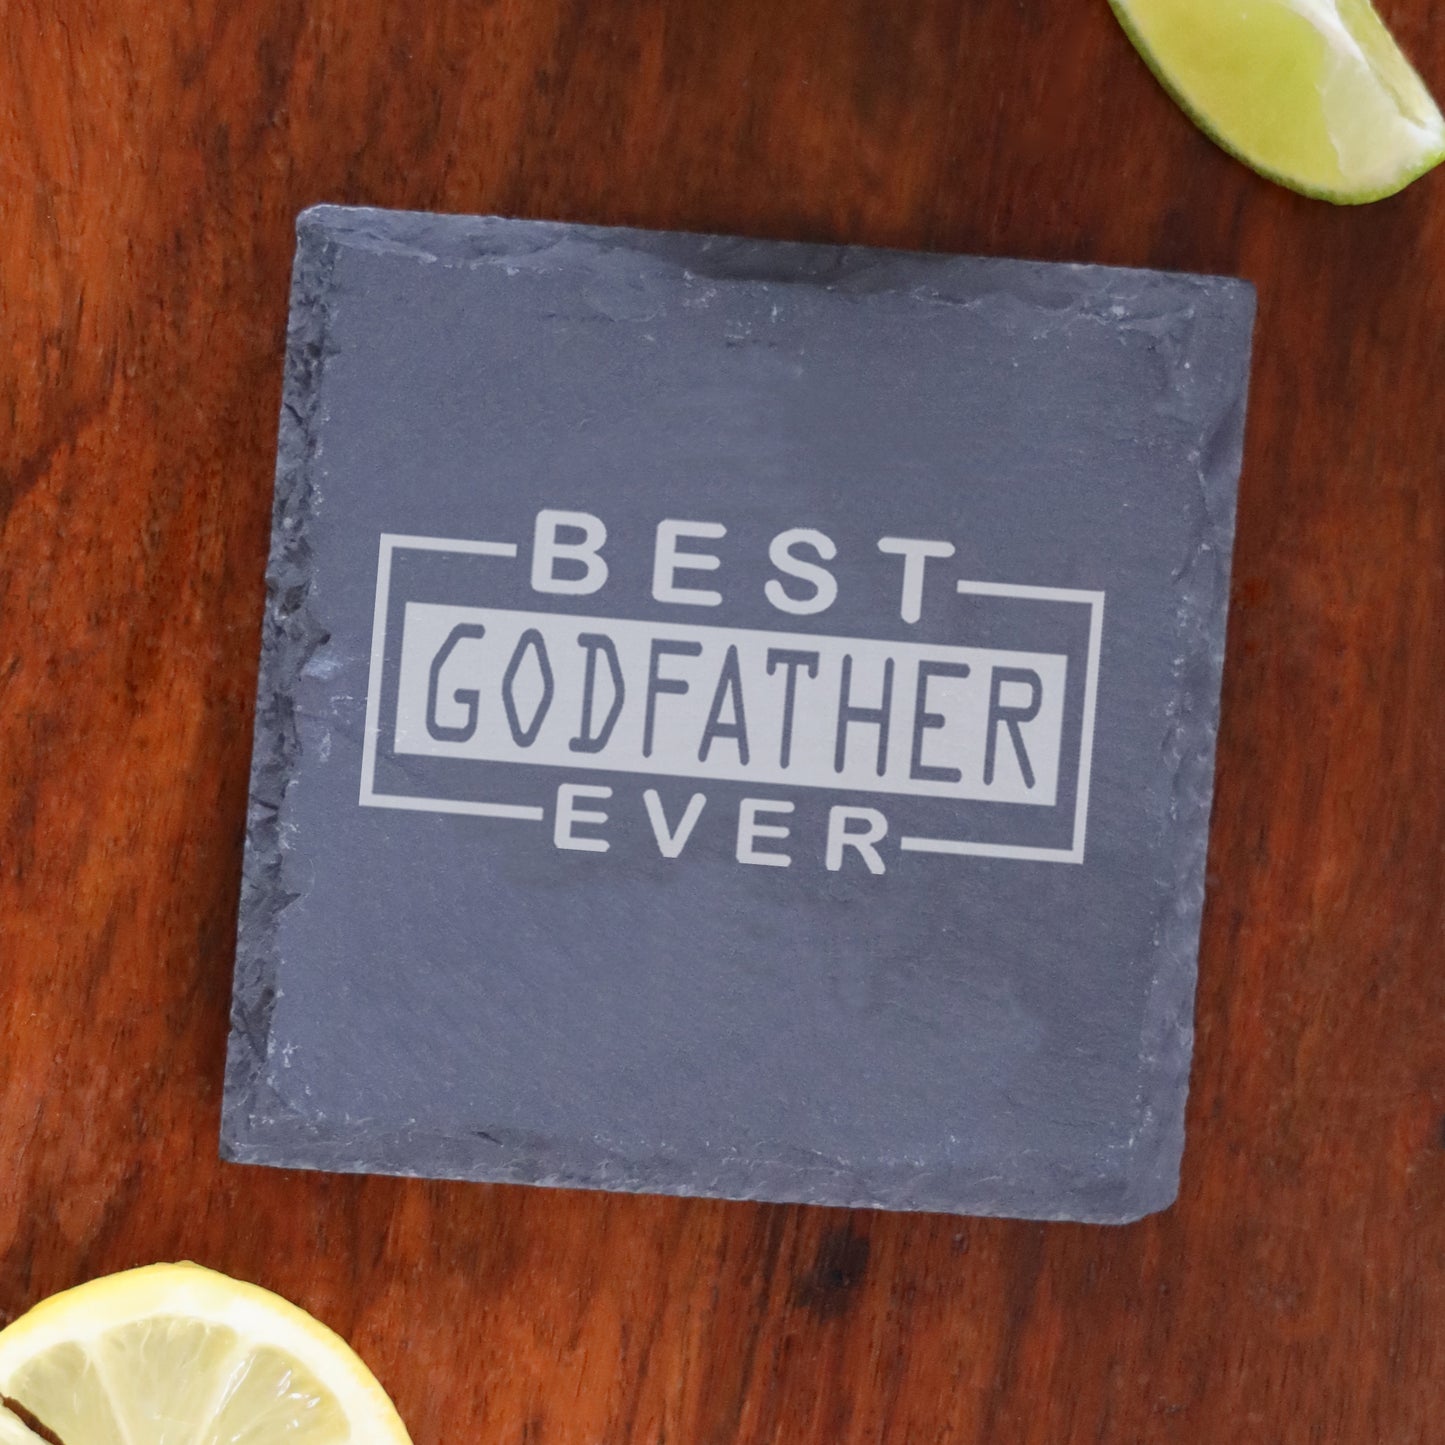 Best Godfather Ever Engraved Whisky Glass and/or Coaster Gift  - Always Looking Good - Square Coaster Only  